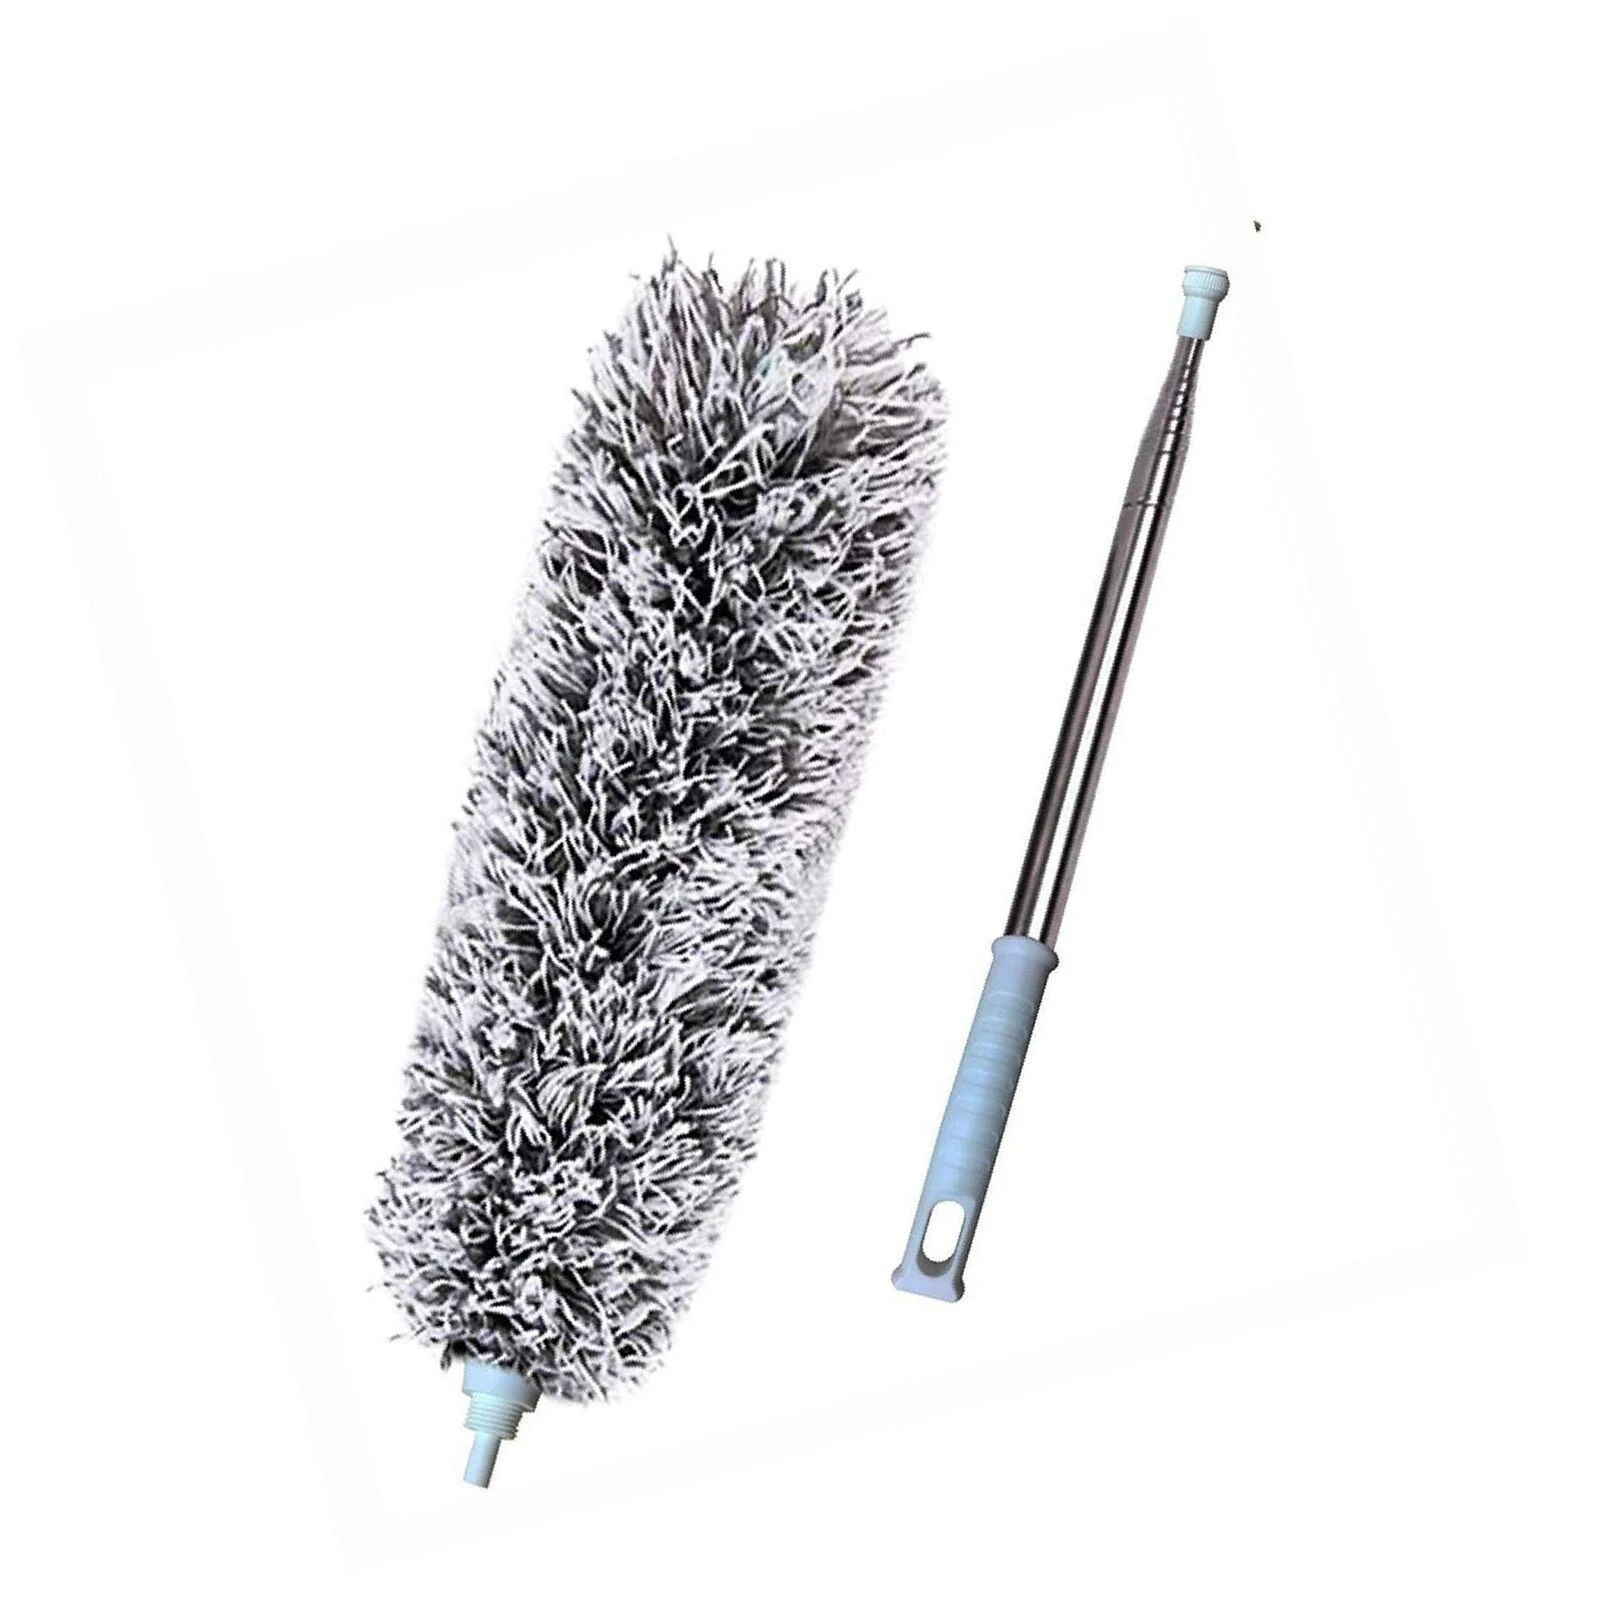 Cleaning Roof, Ceiling Fan, Blinds Telescopic Microfiber Duster With Extension Pole